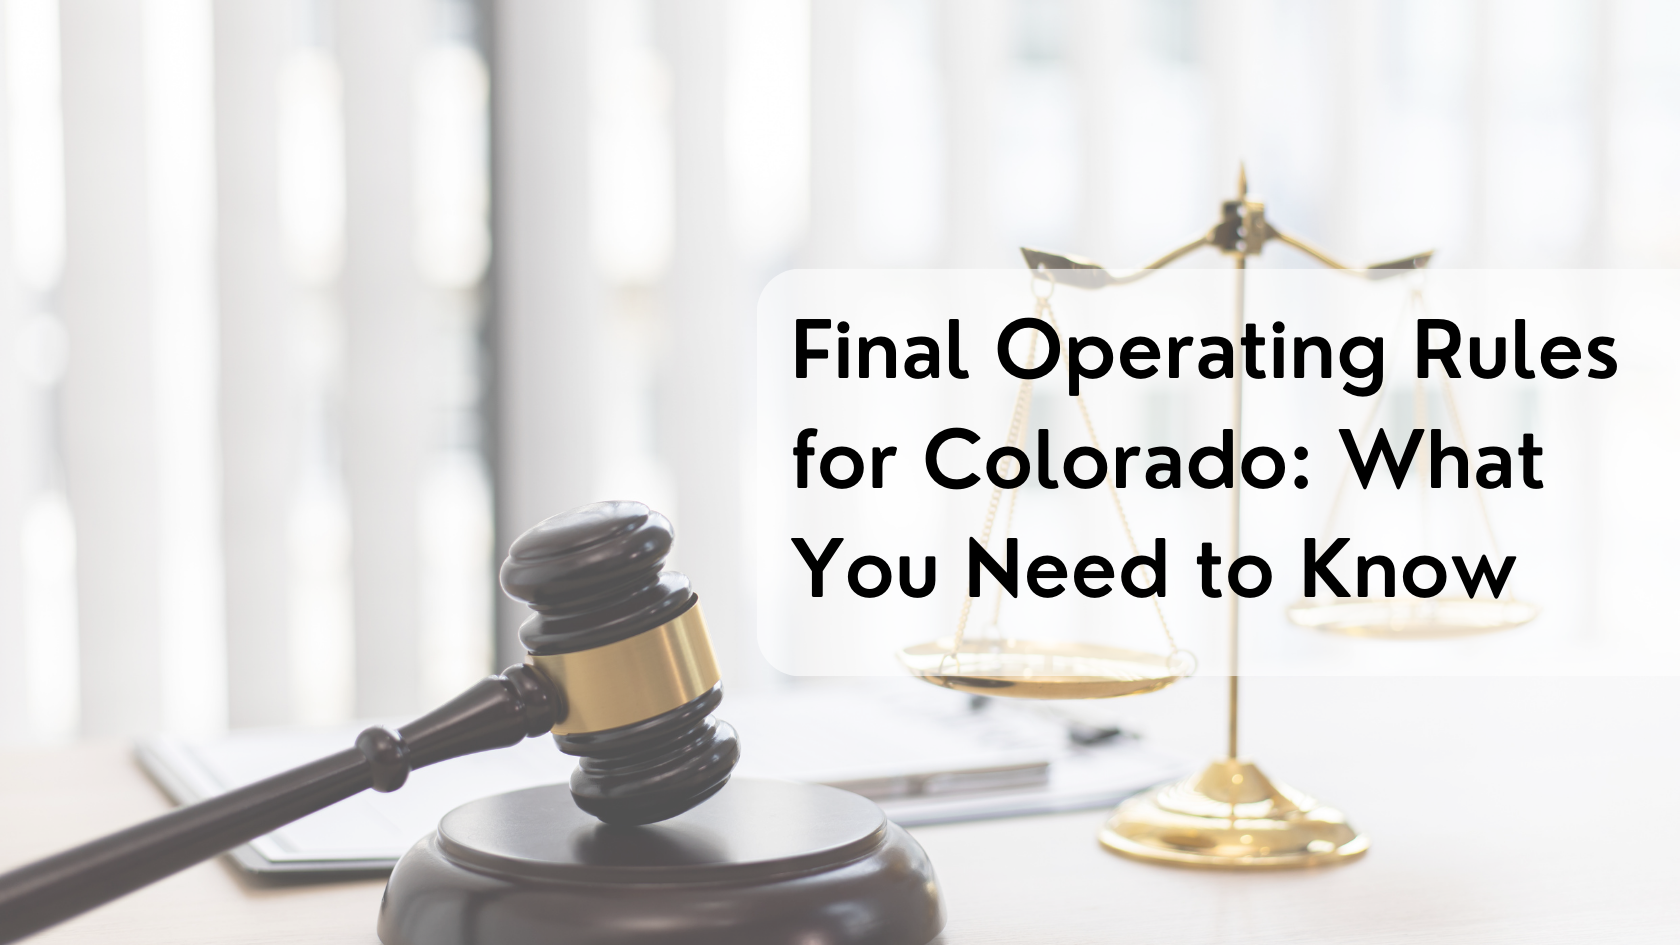 Final Operating Rules for Colorado: What You Need to Know